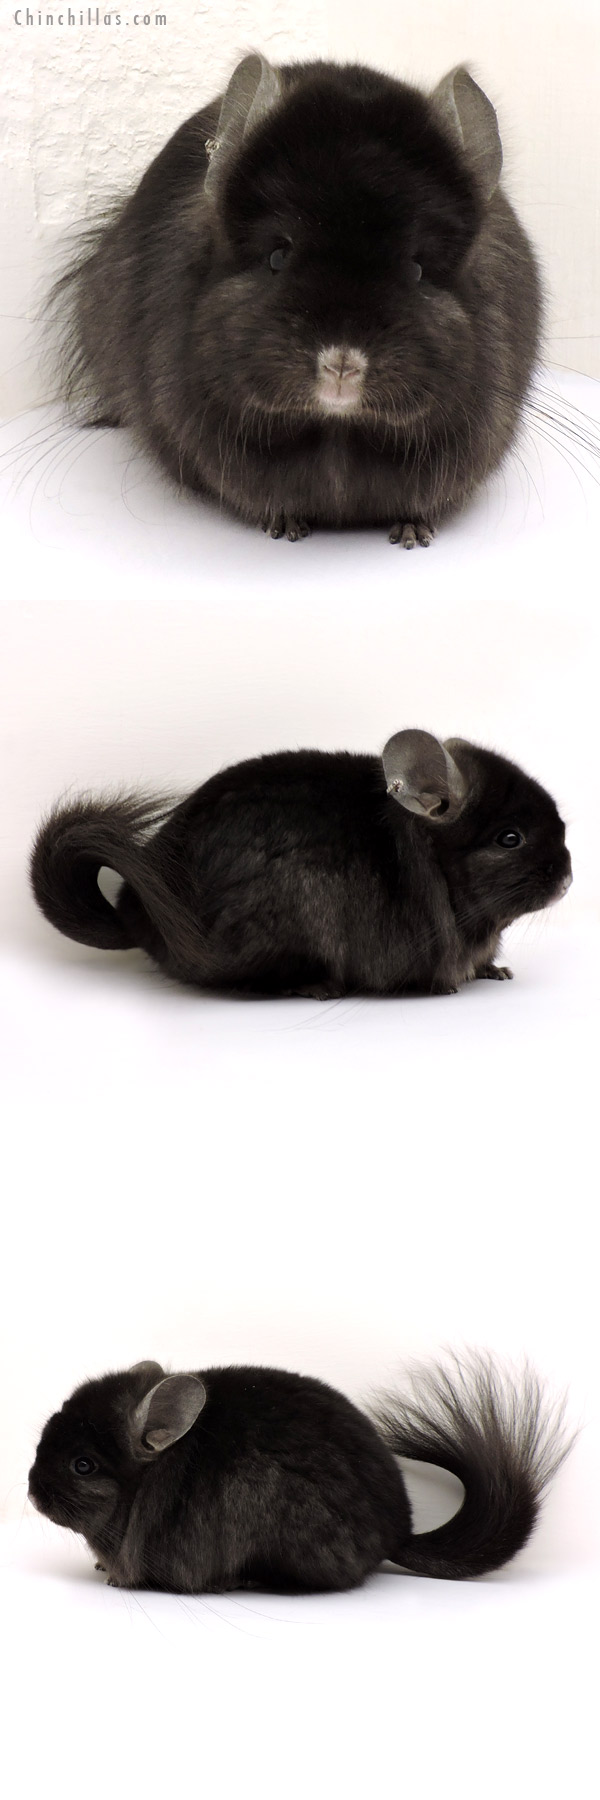 Chinchilla or related item offered for sale or export on Chinchillas.com - 14167 Exceptional Ebony  Royal Persian Angora Female Chinchilla